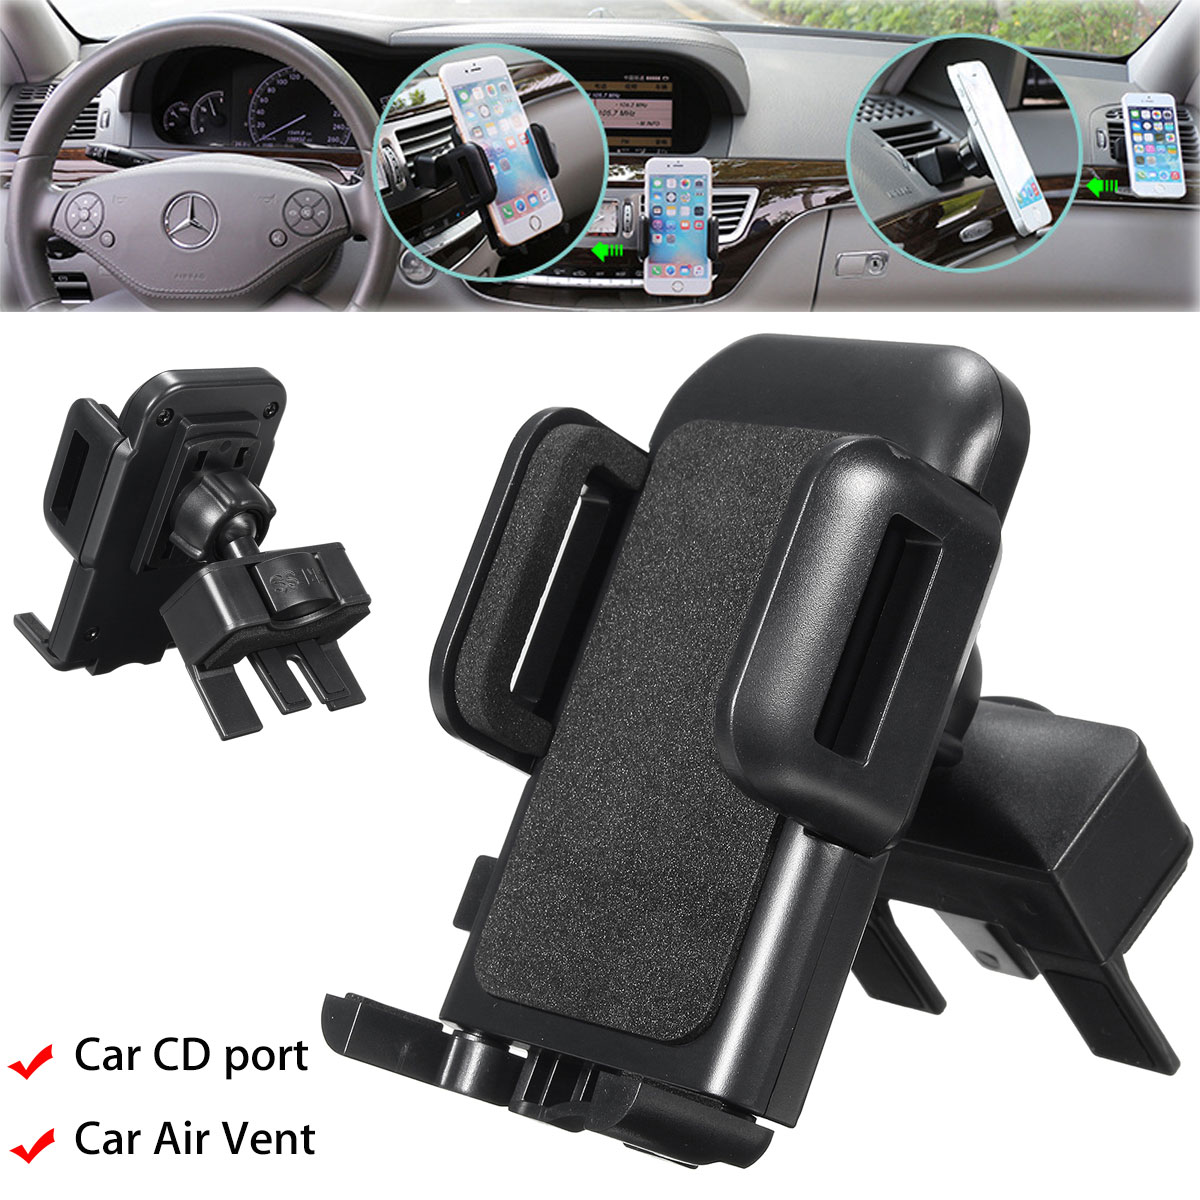 

2 in 1 Phone Stand Car Air Vent Mount CD Slot Holder for under 6 inches Smartphone